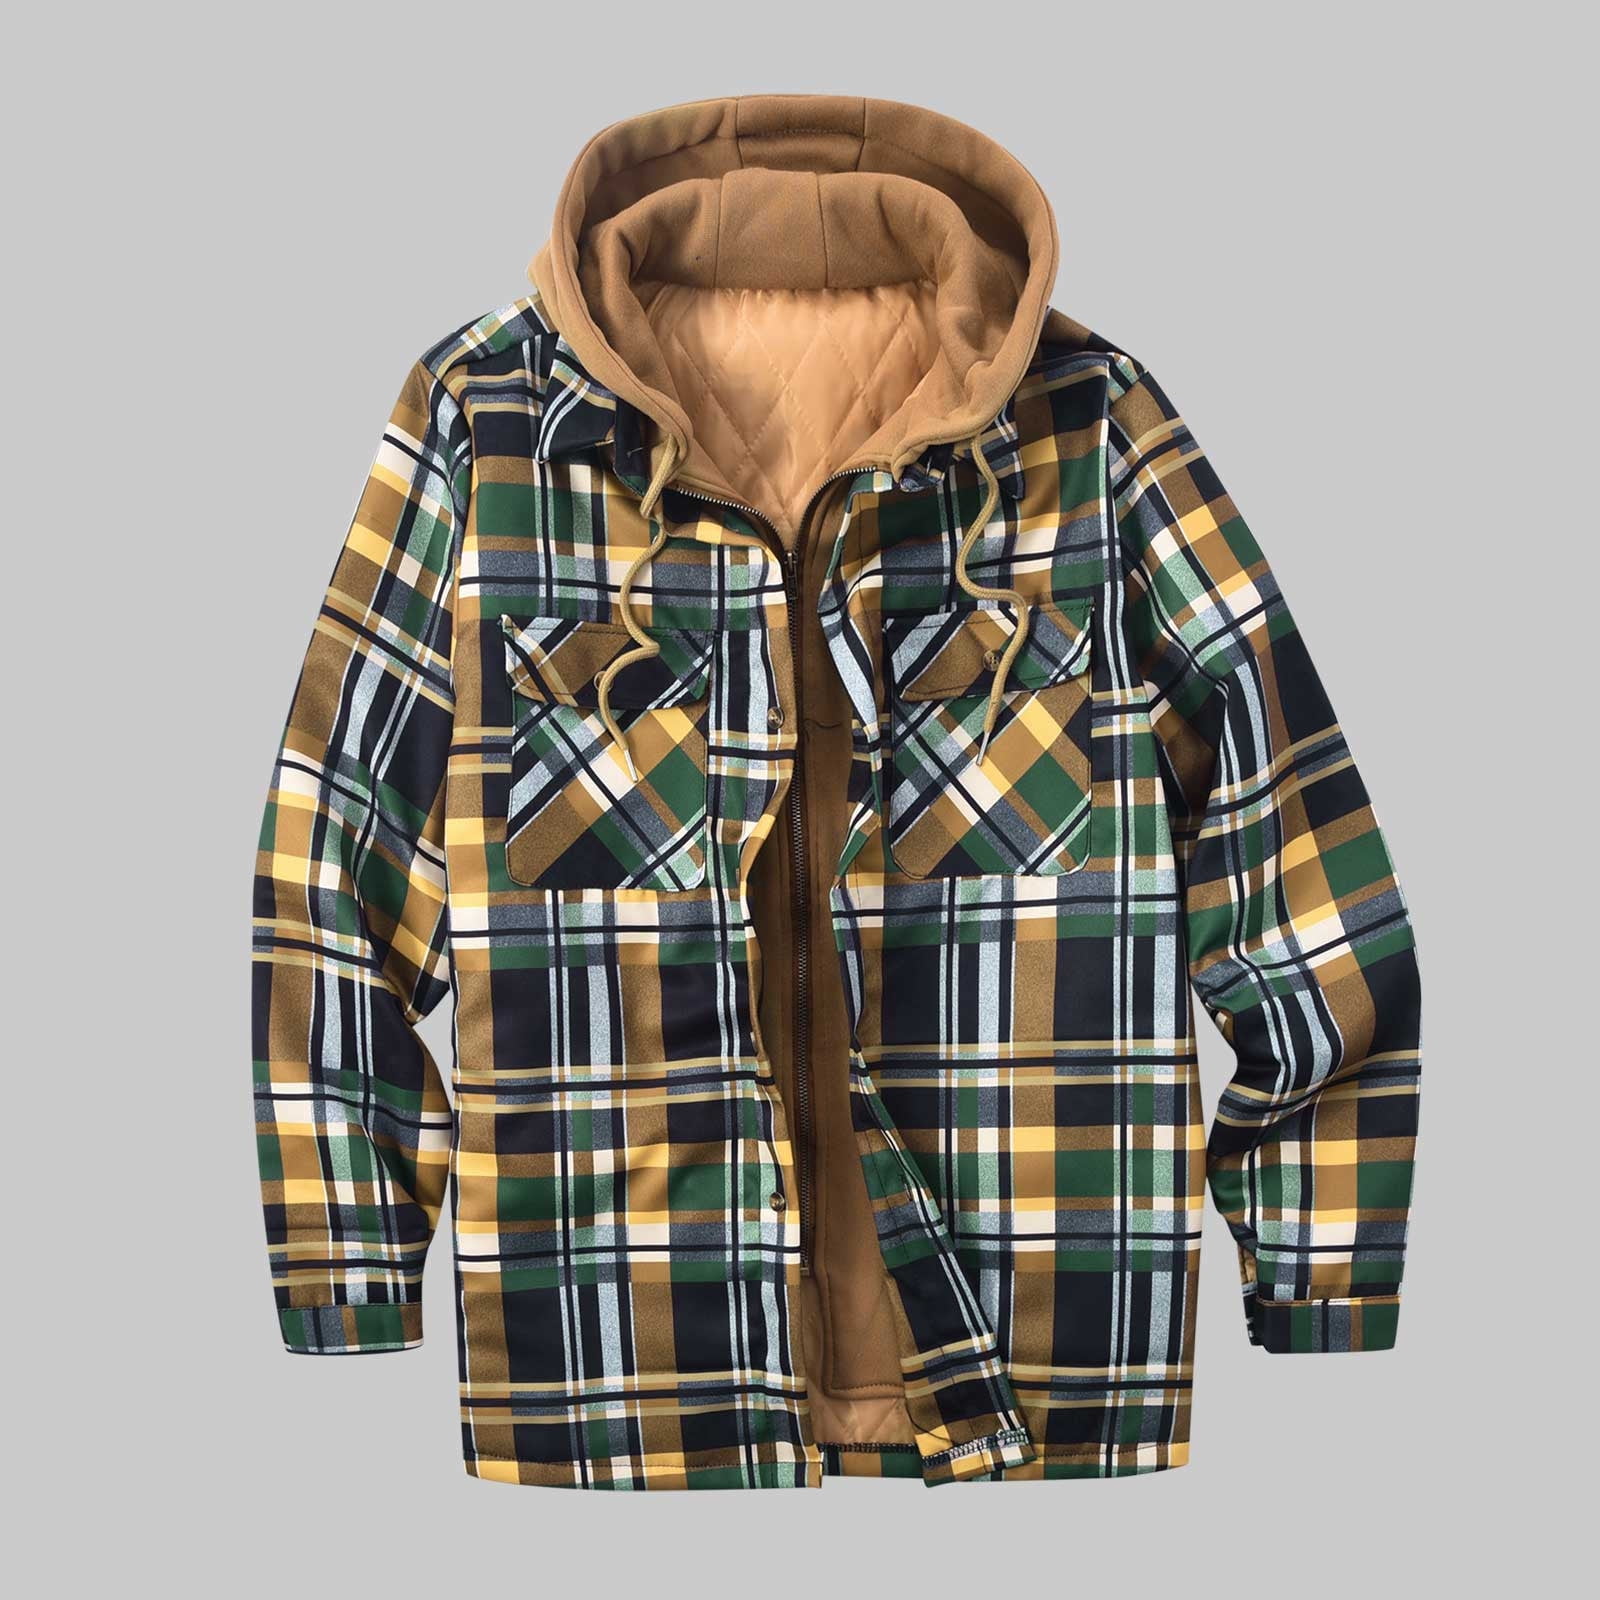 NWQKYZGH Men's Cotton Plaid Shirts Jacket Fleece Lined Flannel Shirts  Sherpa Button Down Jackets With Hood for Men 